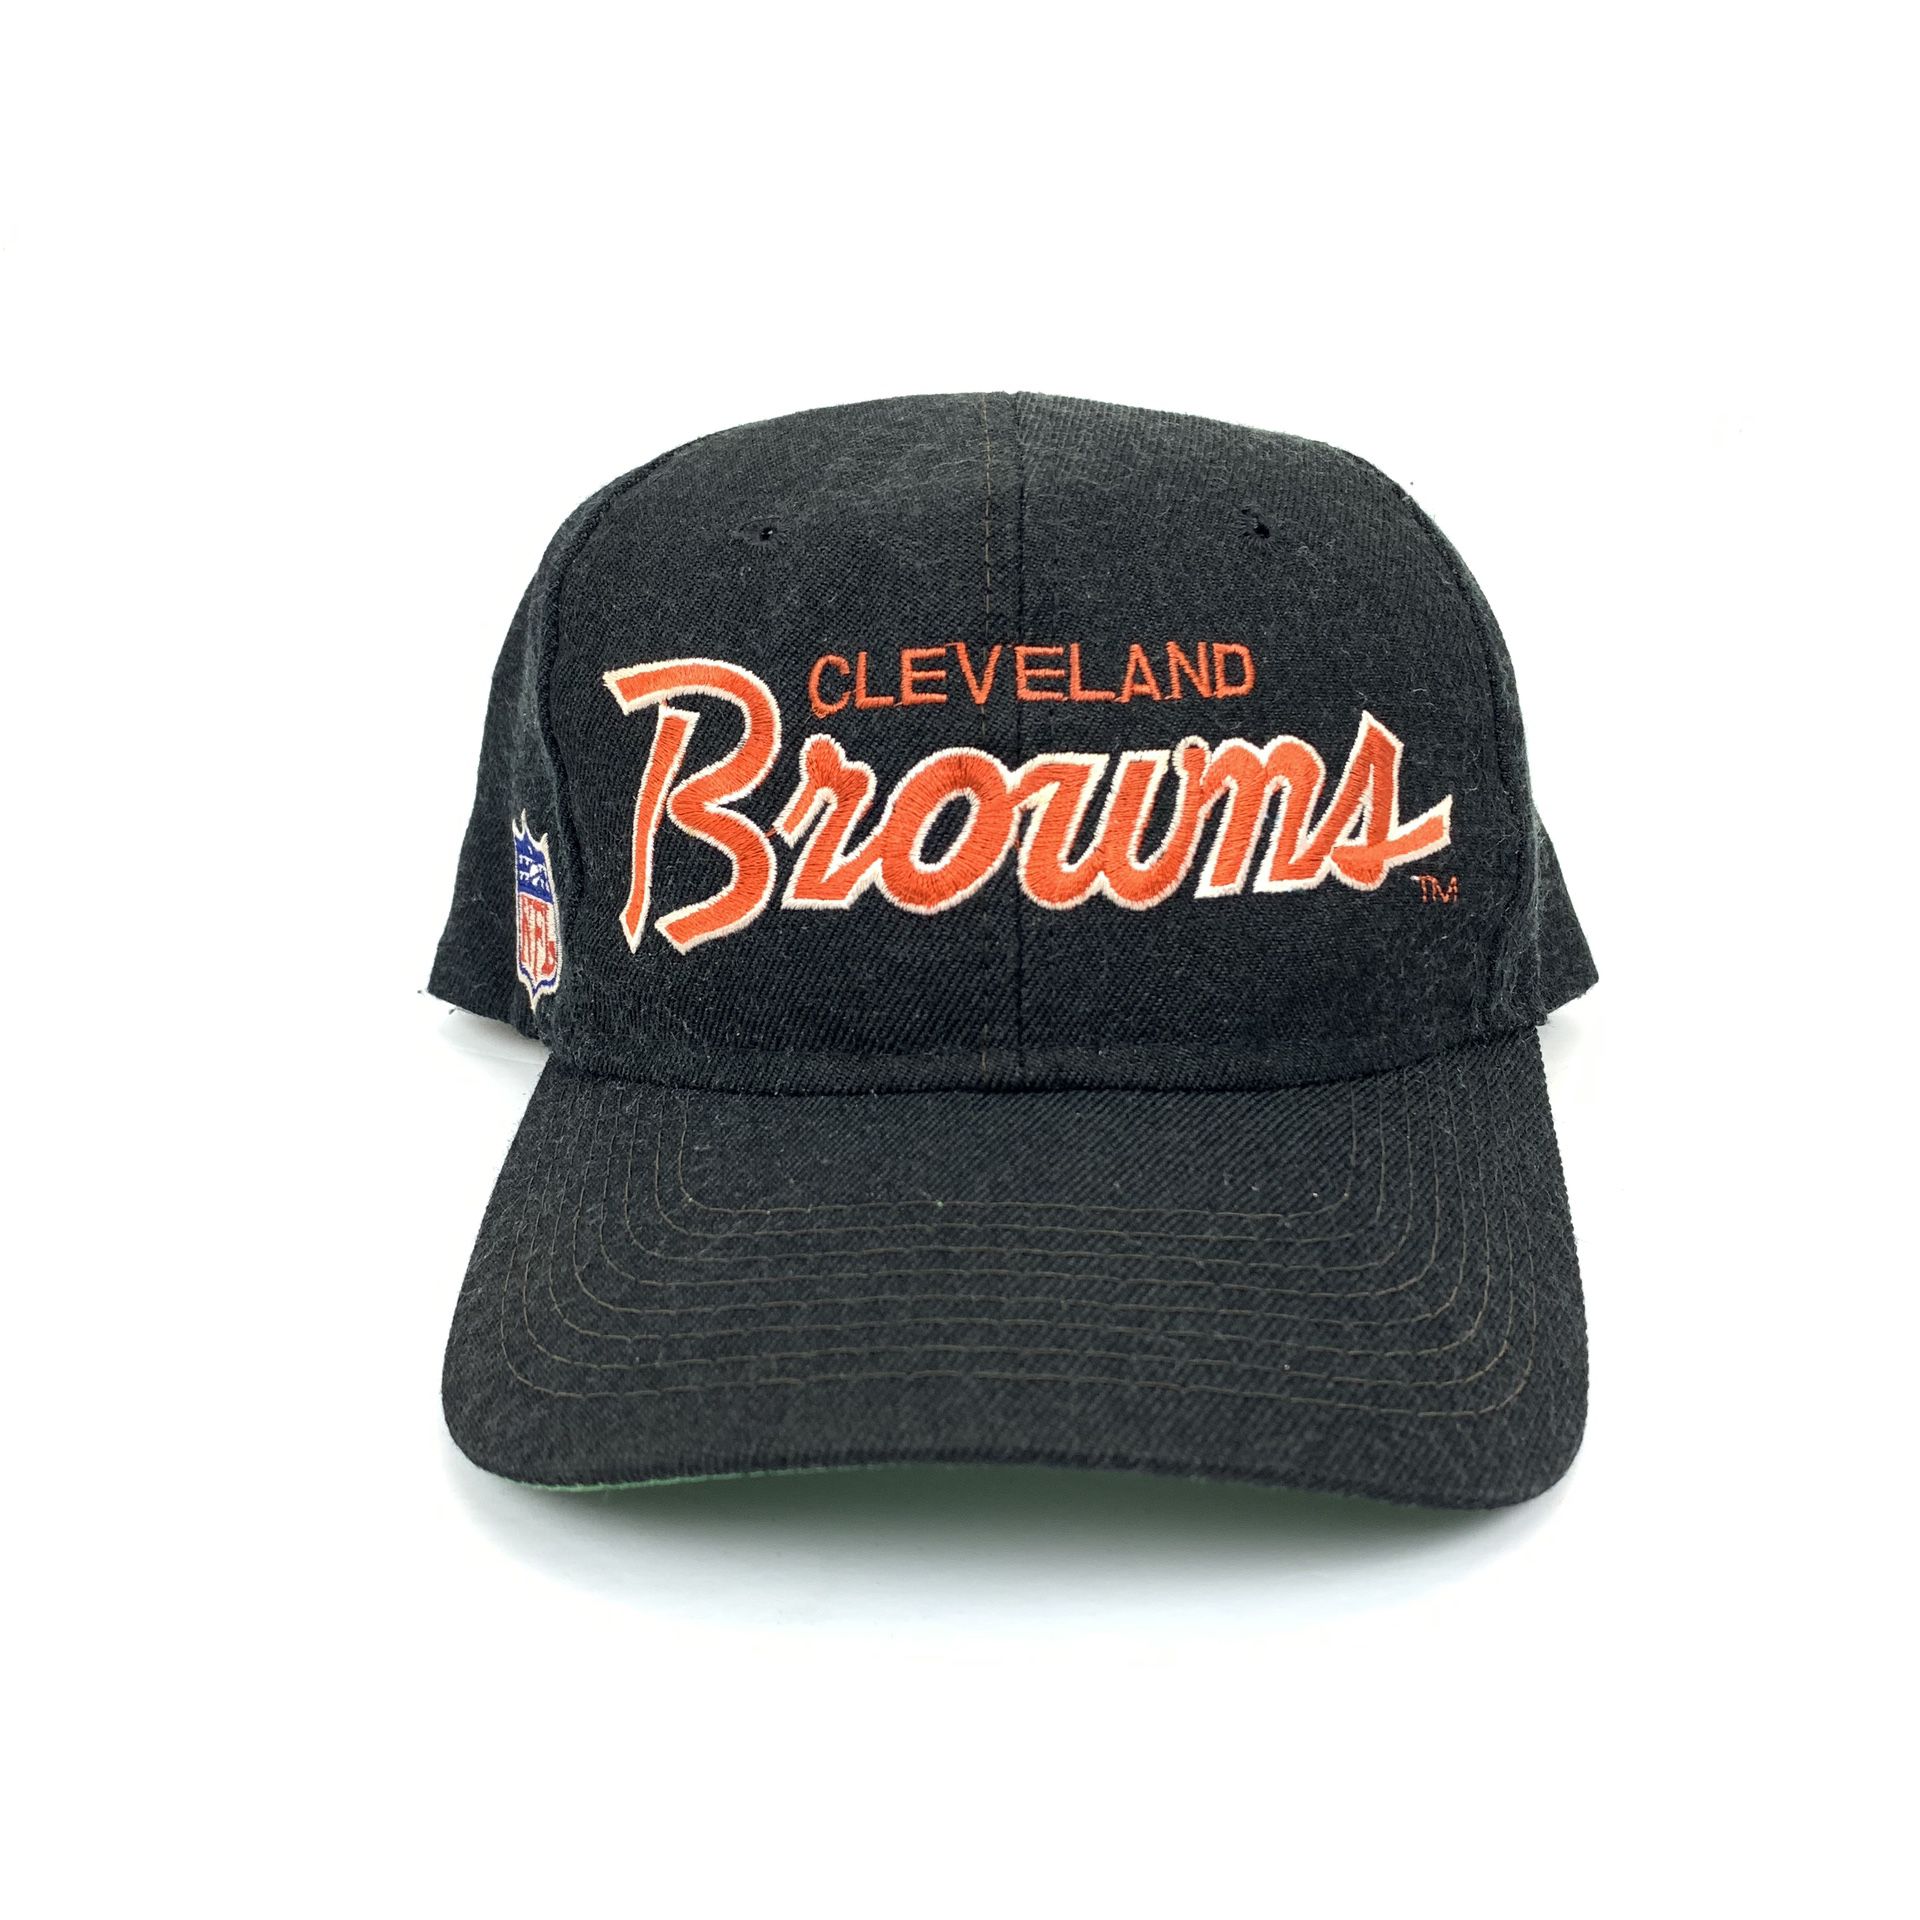 Vintage Cleveland Browns Script Sports Specialties Snapback Hat for Sale in  Pico Rivera, CA - OfferUp